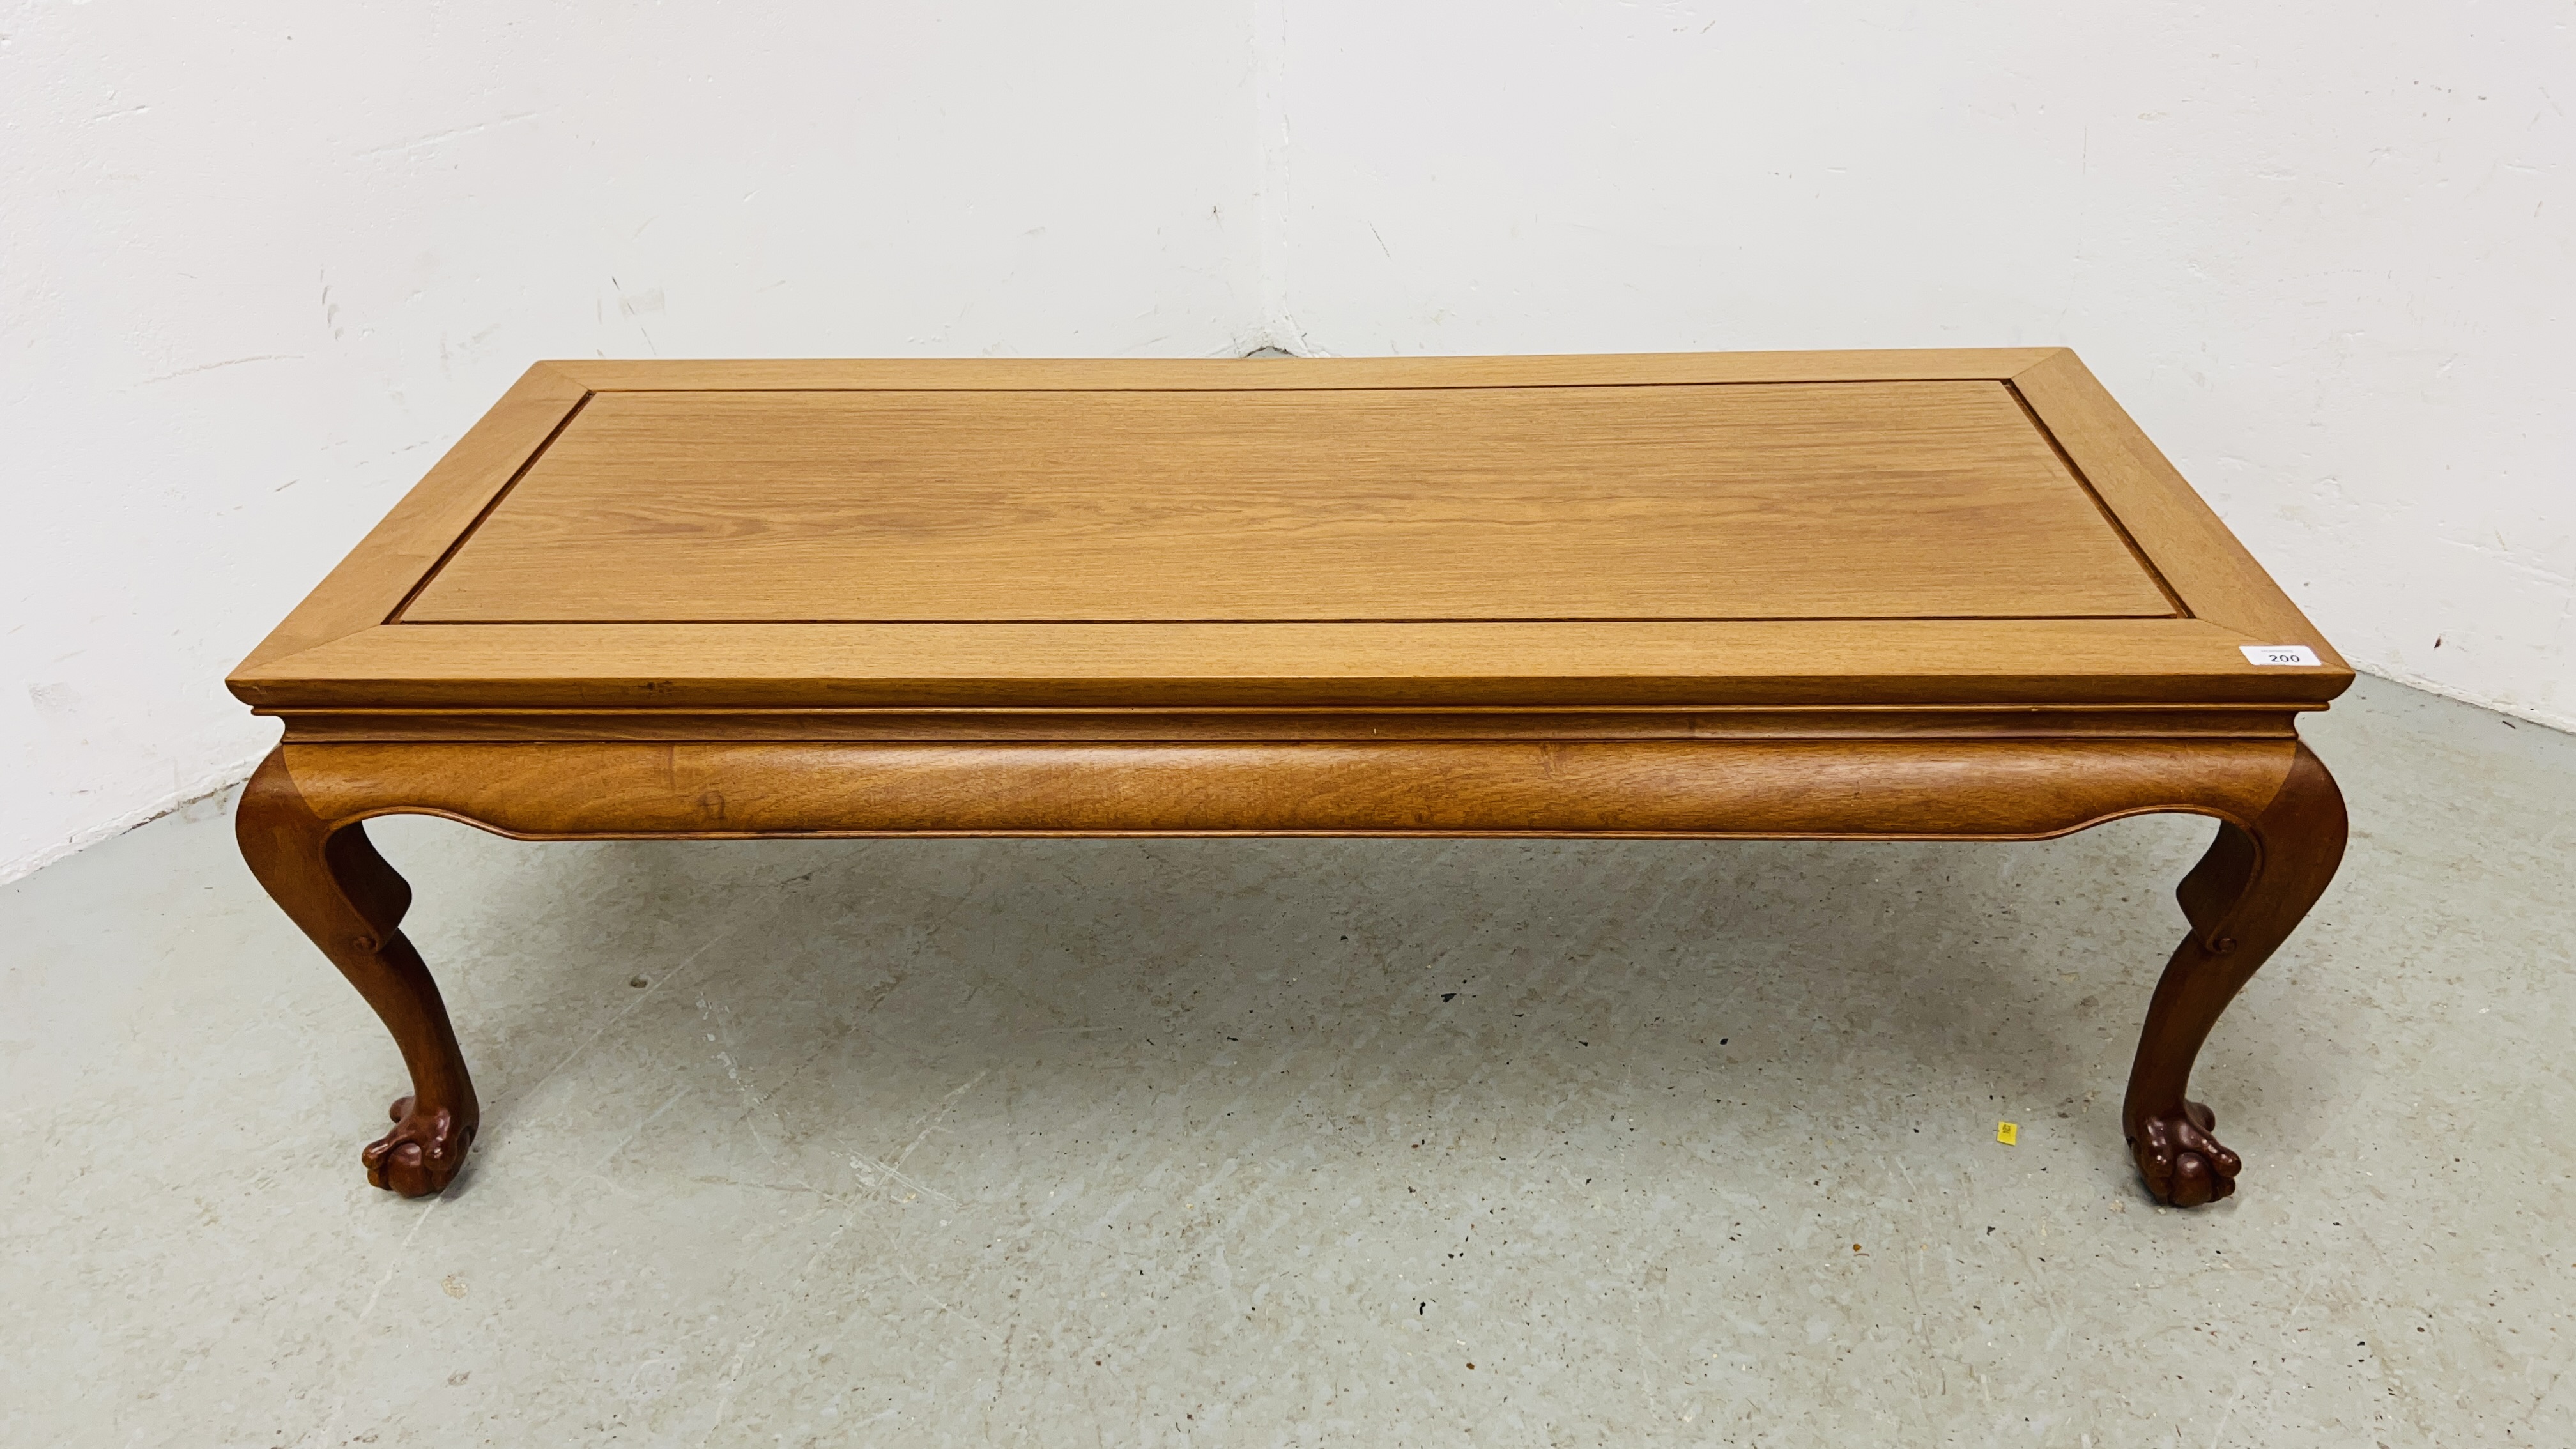 REPRODUCTION ORIENTAL HARDWOOD TABLE ON BALL AND CLAW FEET L 122CM, D 51CM, H 41CM.